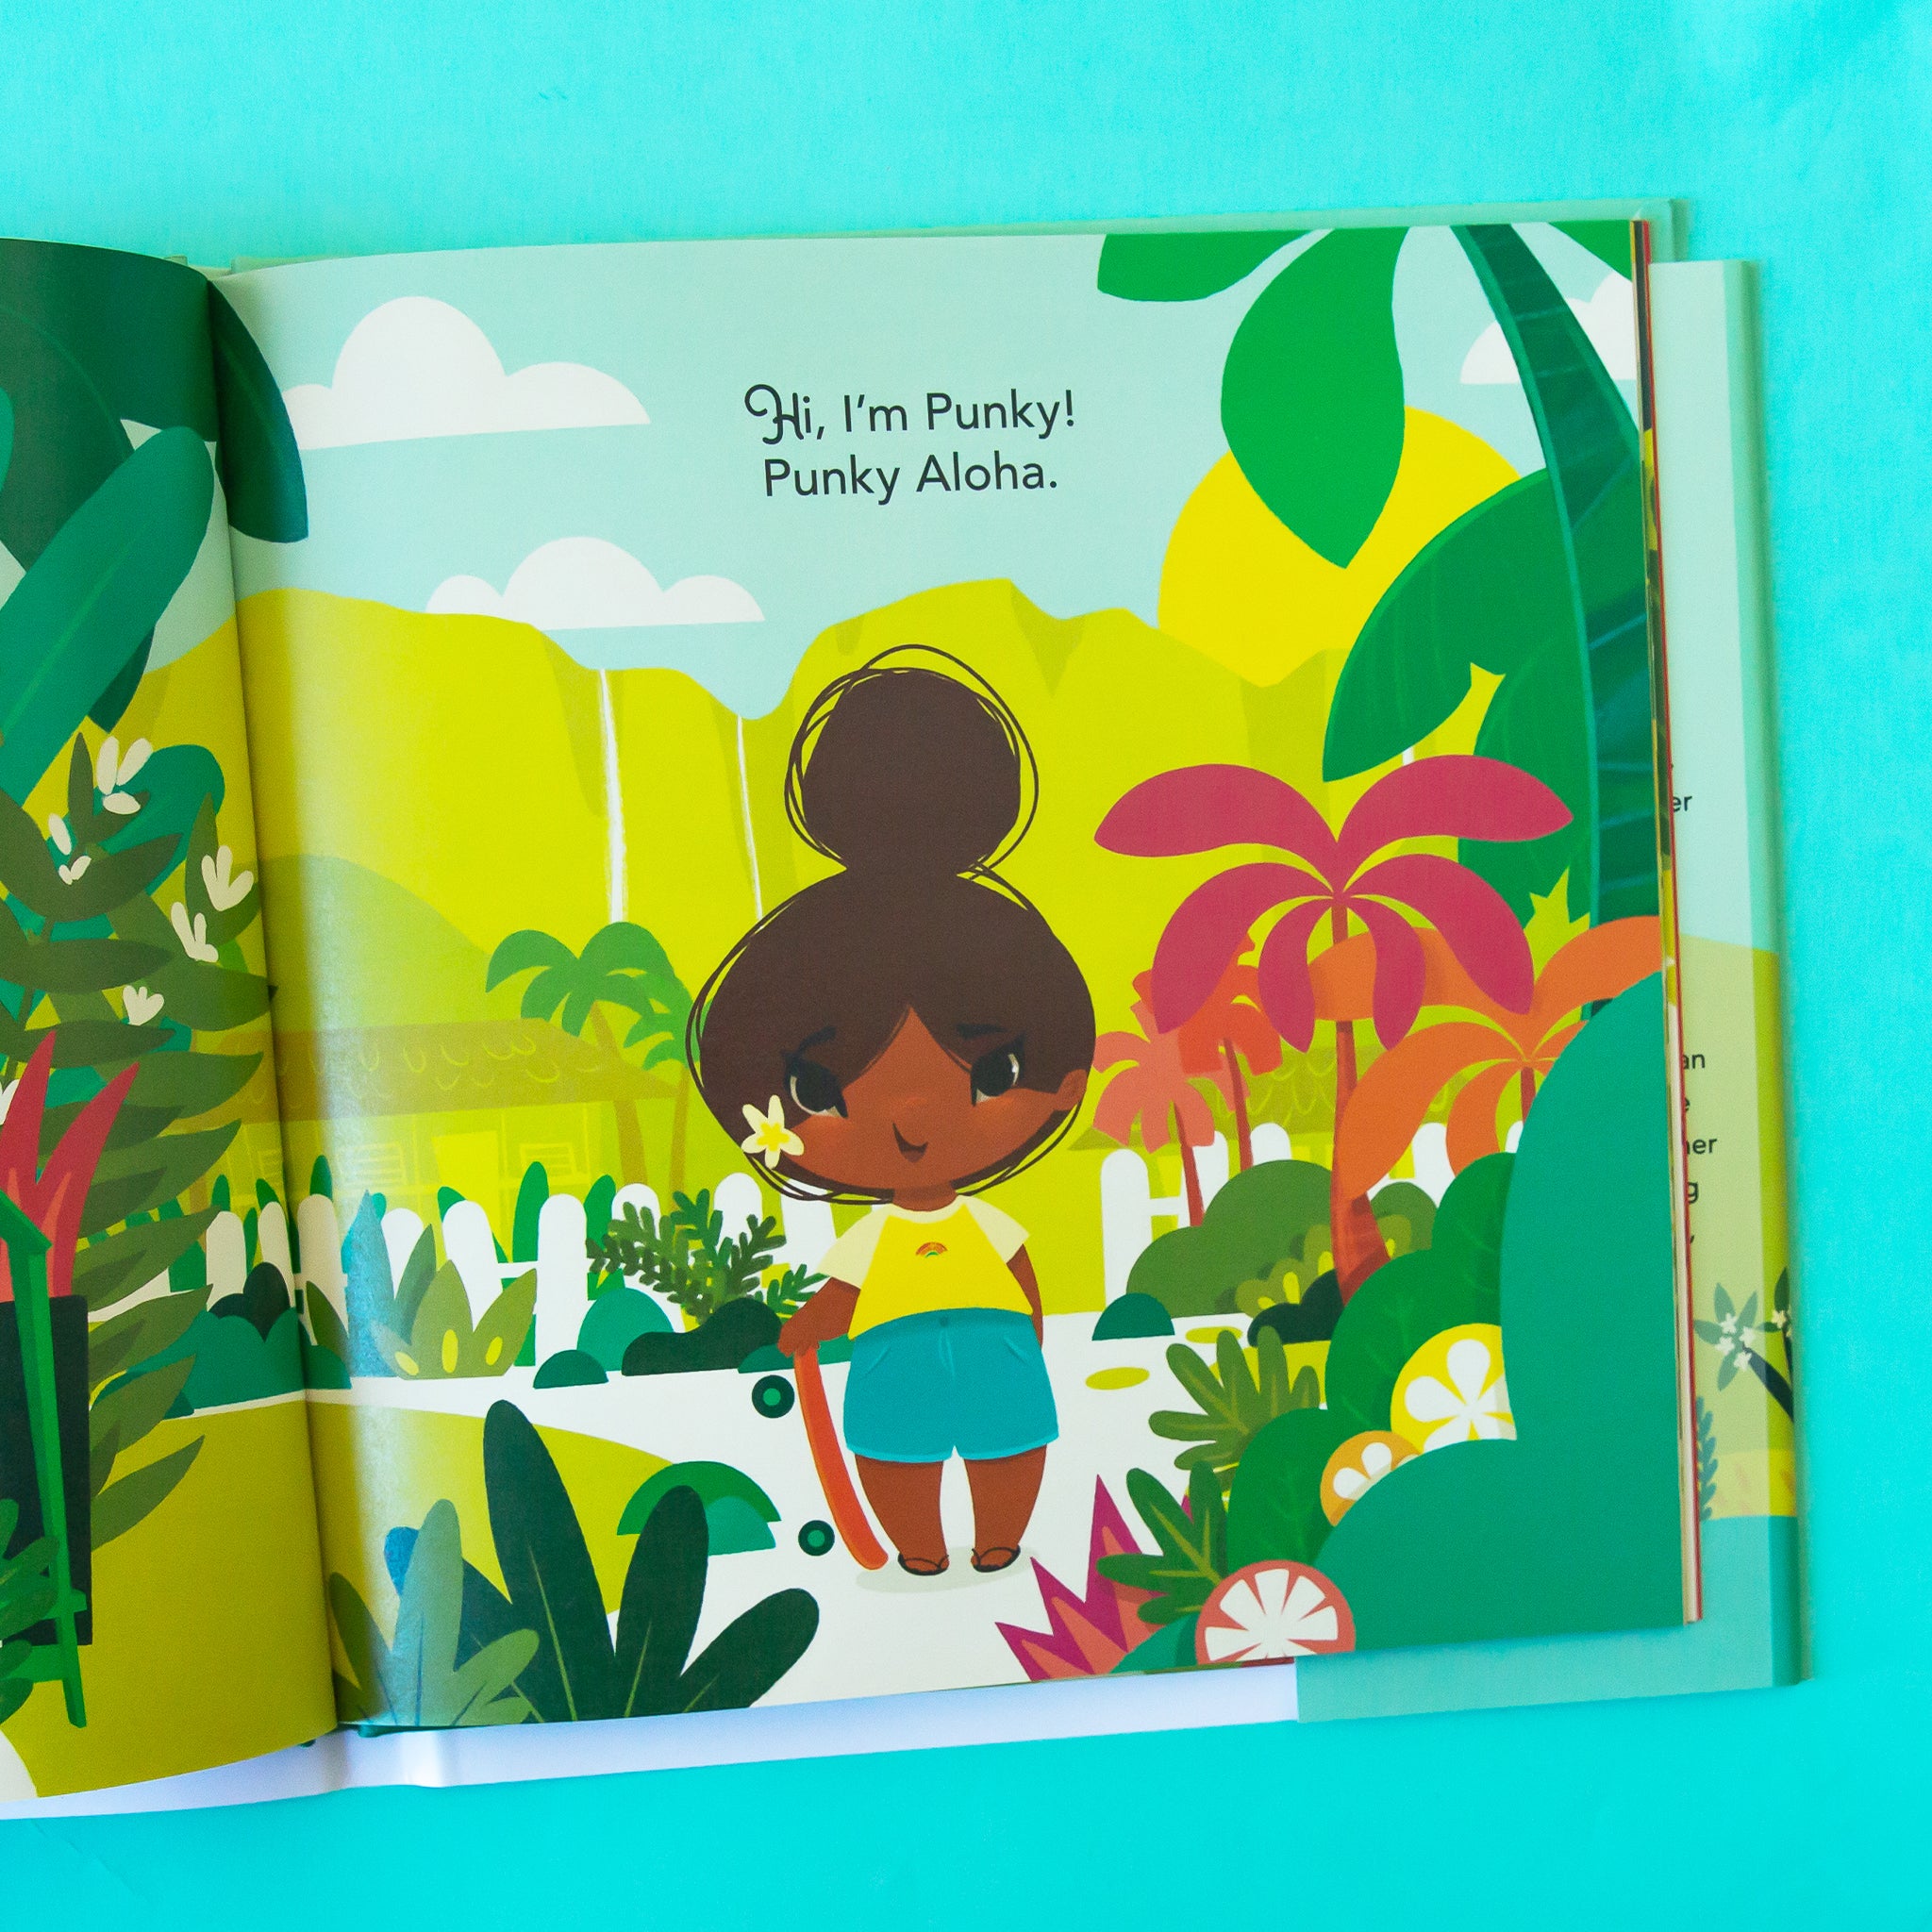 A vibrantly illustrated book opened to a page with illustrations of the main character Punky with a skateboard and text above that reads, "Hi, I'm Pinky! Punky Aloha.". 